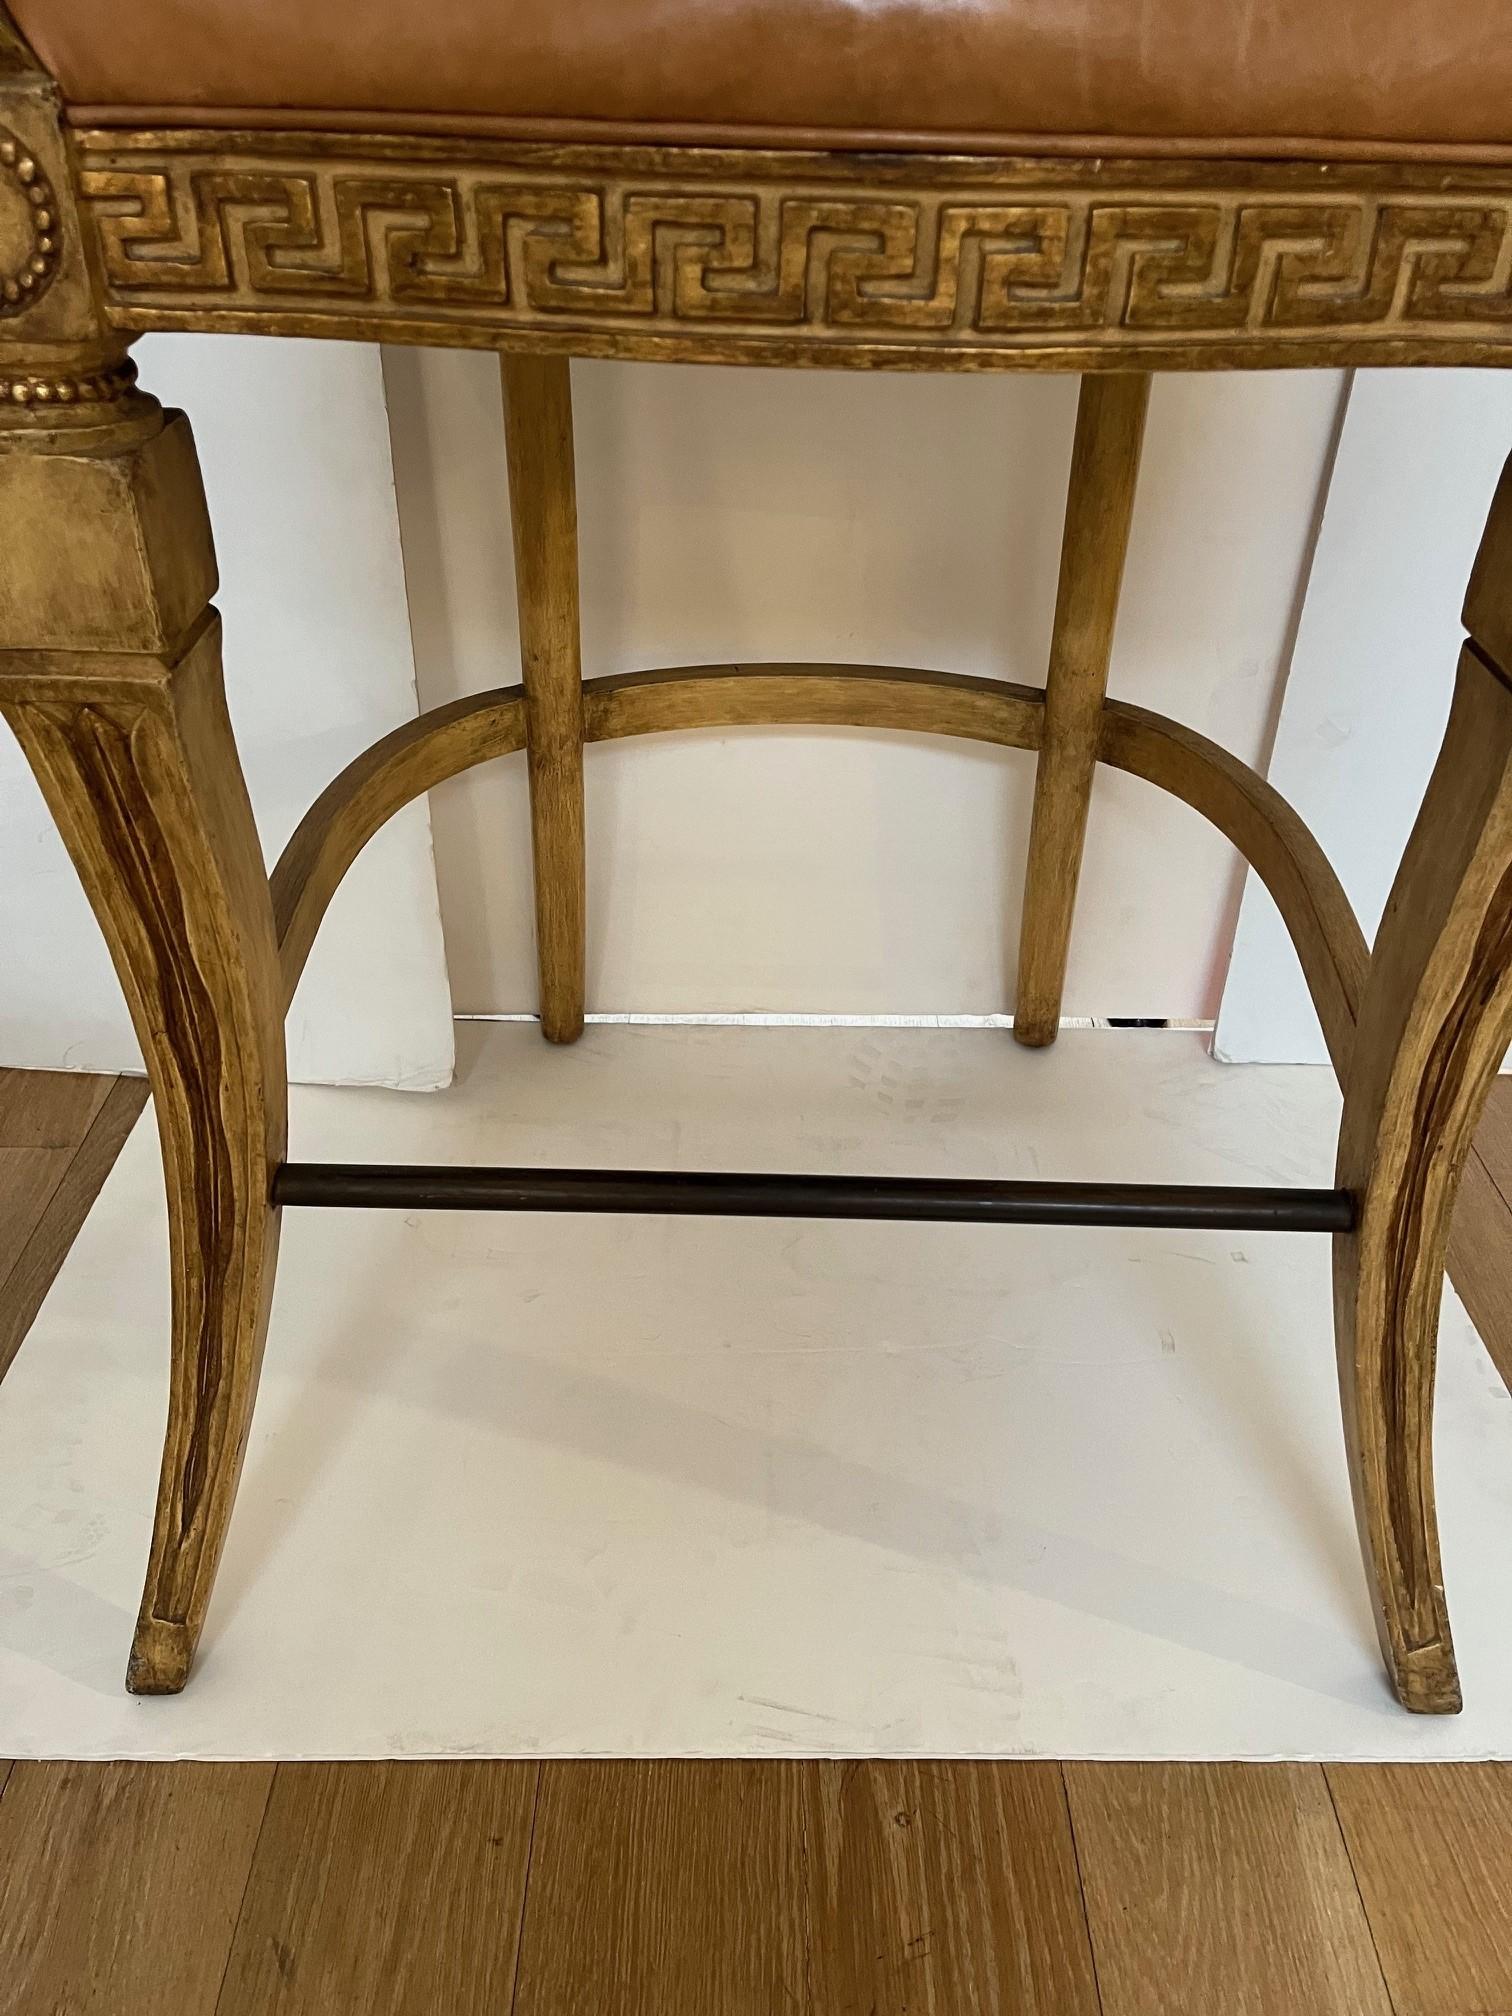 Carved Made to Order Venetian Bar Stool in Antique Painted Finish with Gilded Detail For Sale